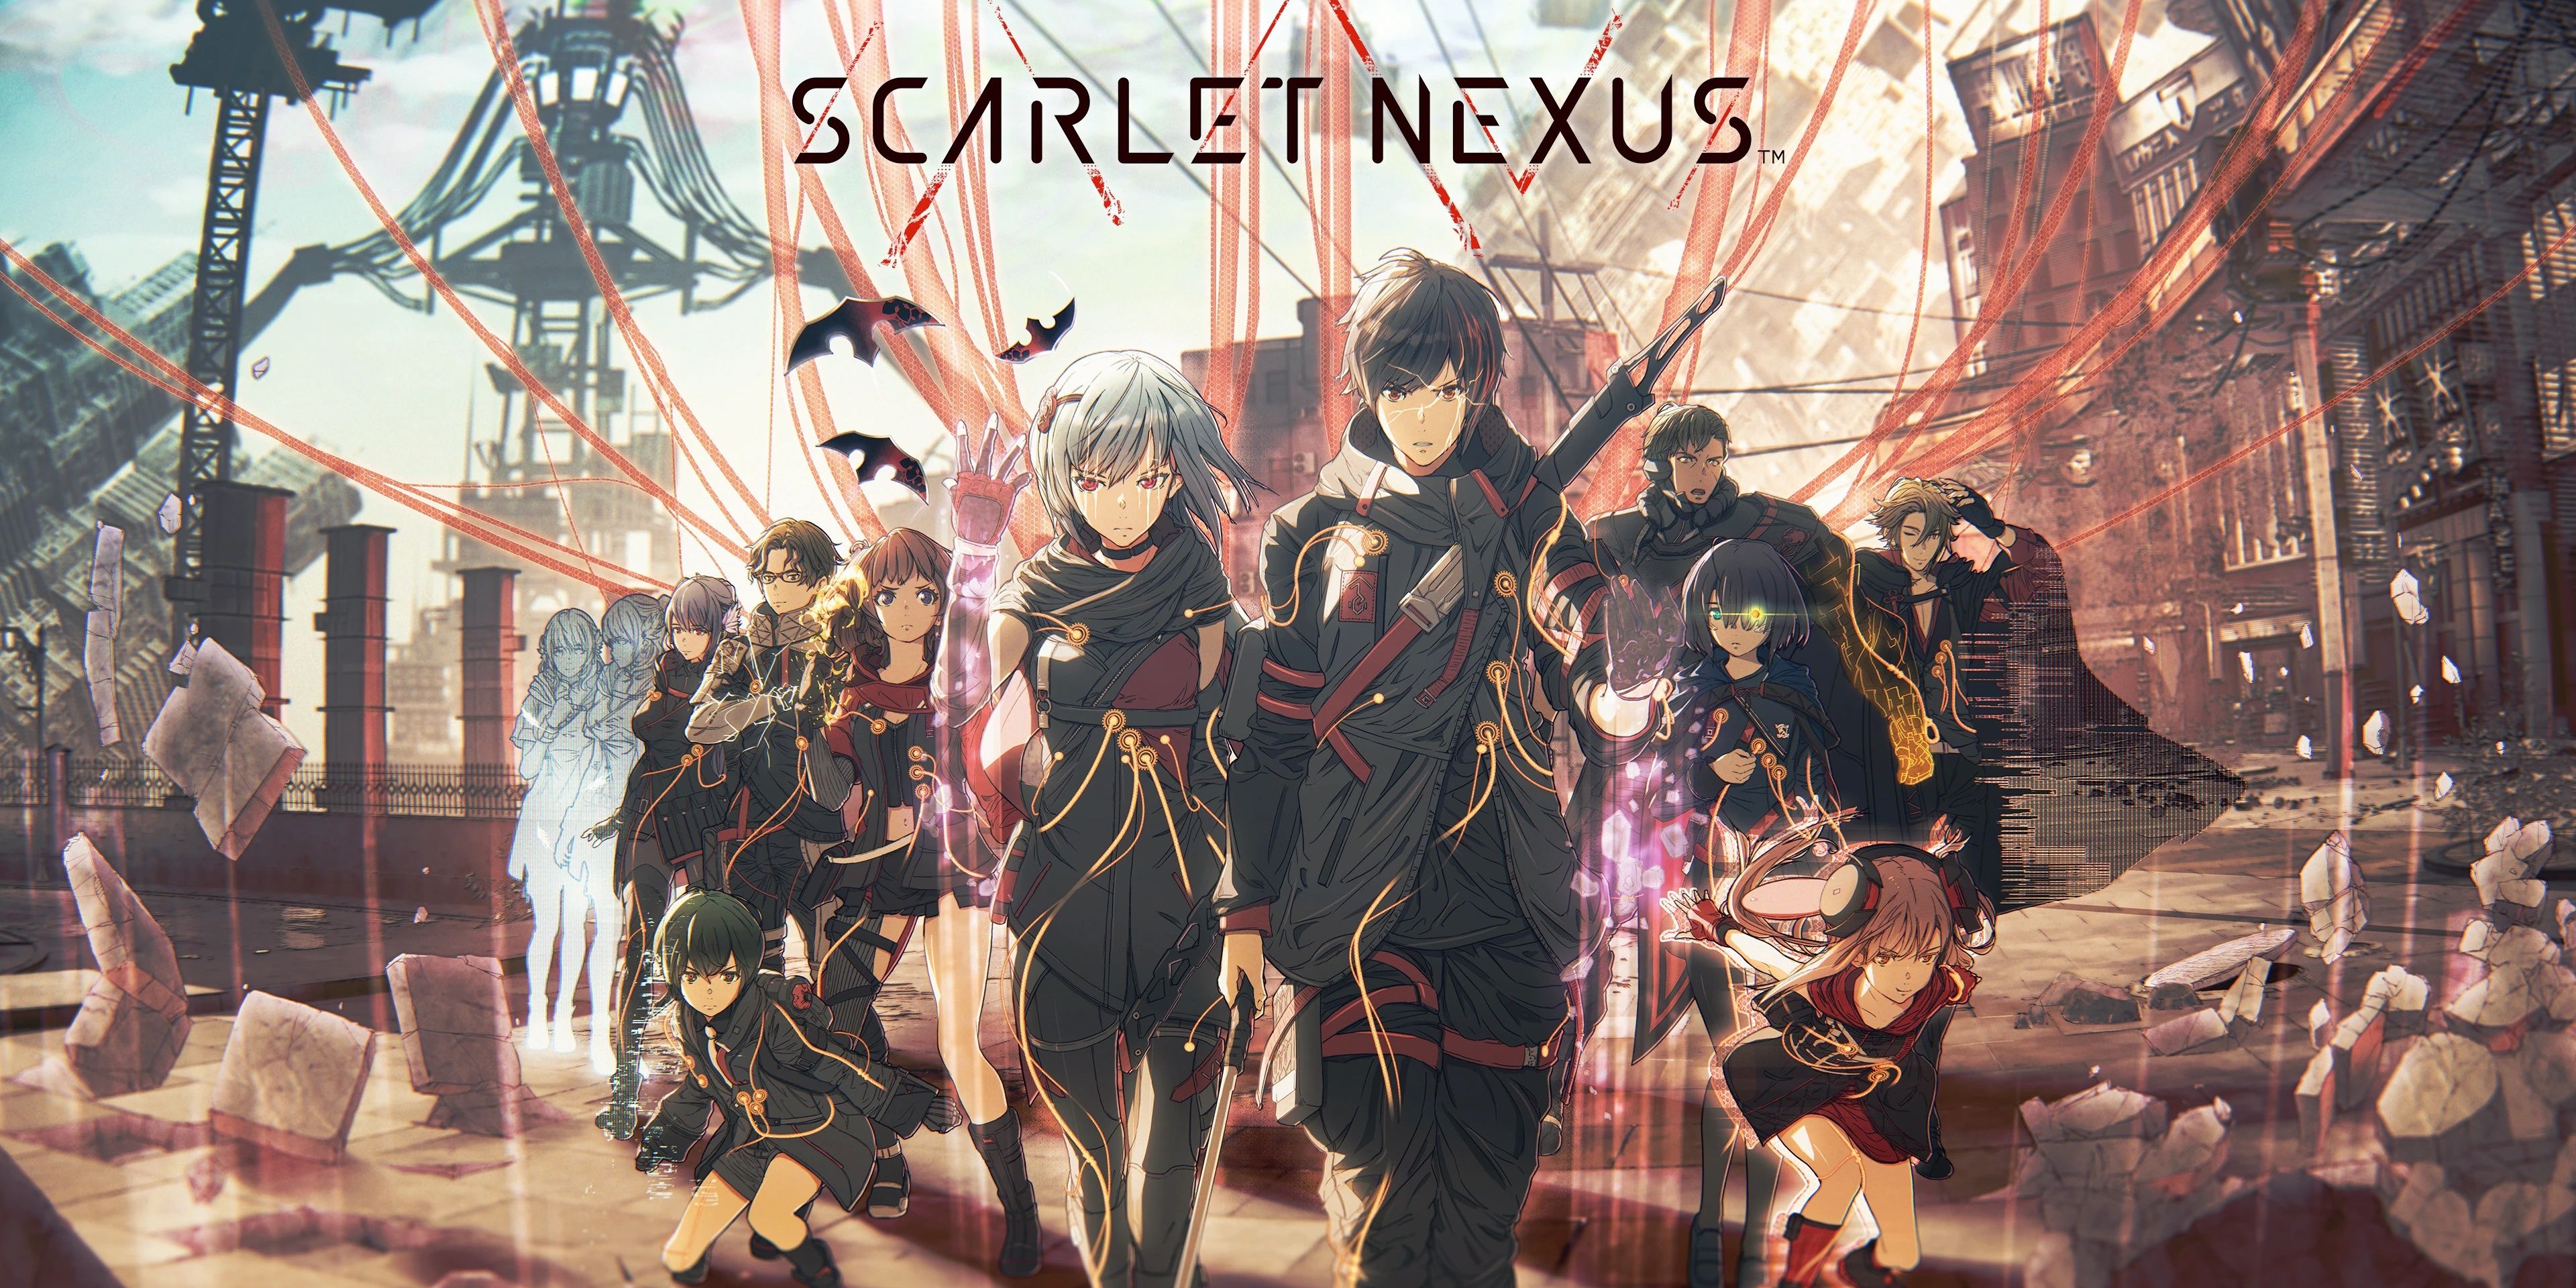 Japanese action RPG Scarlet Nexus will debut June 25 and will premiere an  anime series based on